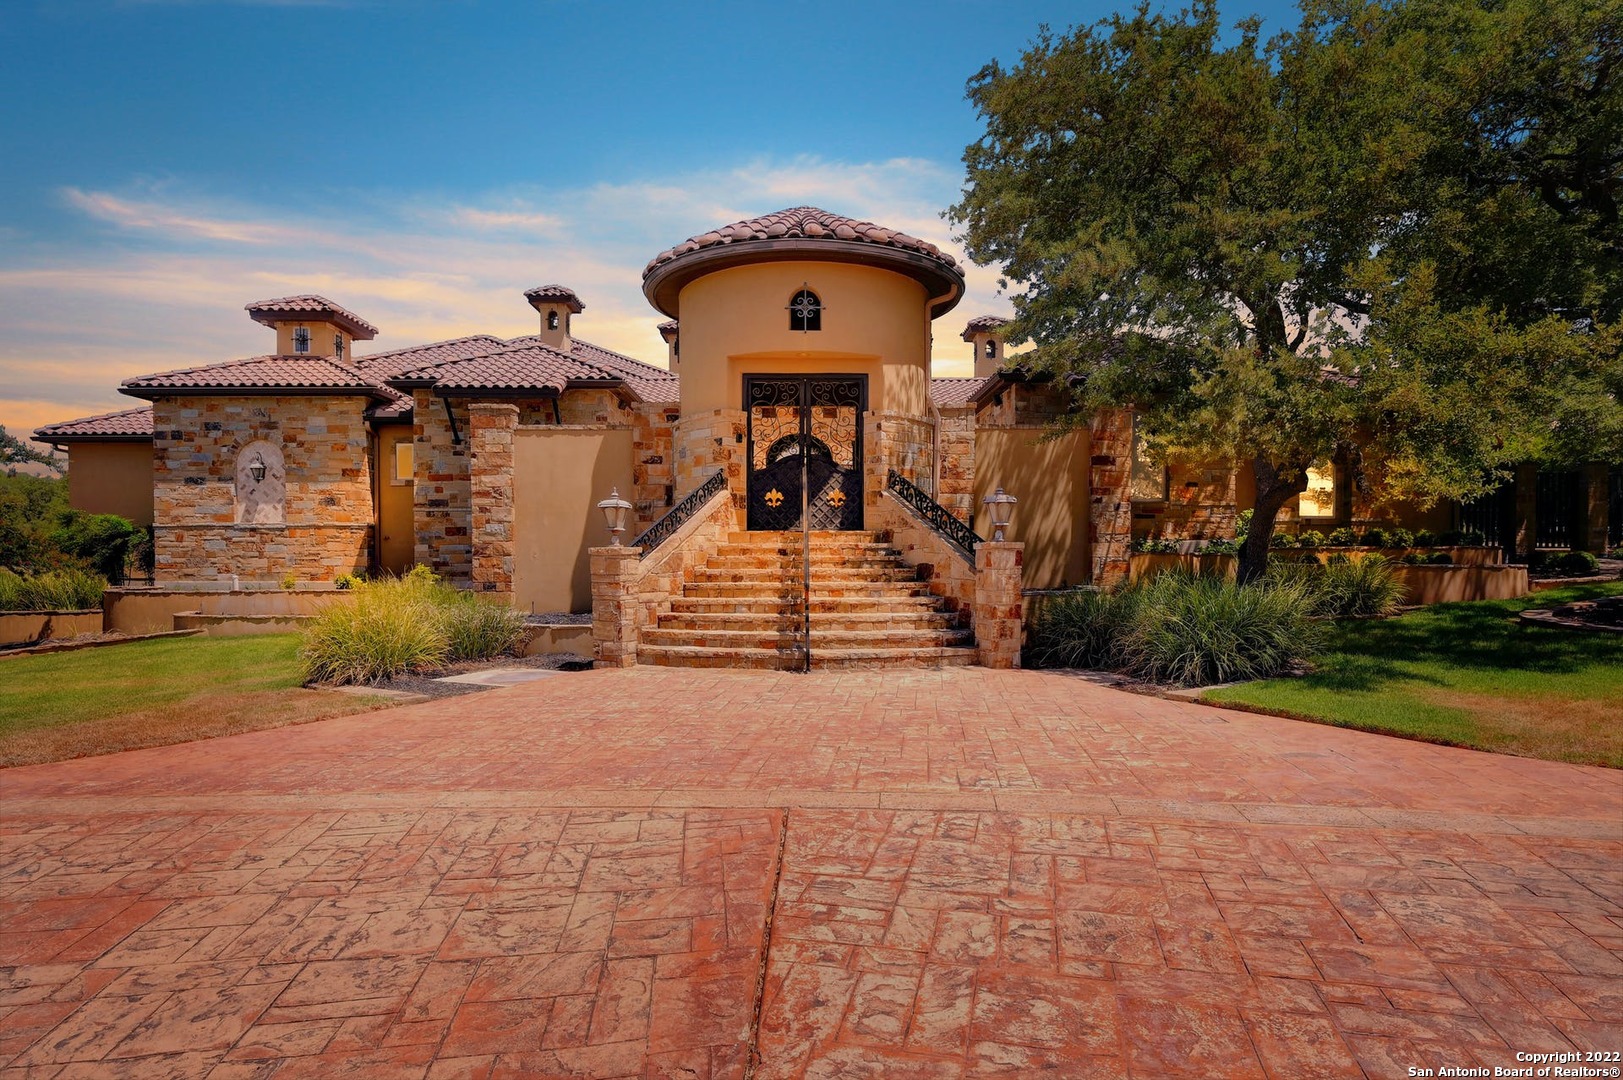 Over 9200 sqft of immaculate Hill Country real estate sitting on 2+ acres in New Braunfels, TX. Entering through a Mediterranean-style courtyard, passing a beautiful fountain, you will be amazed by this homes grand entrance. This custom built home includes beautiful marble mosaics, mesquite wood flooring, high ceilings, cathedral ceilings, custom wood accents, Nanawalls, and Venetian plaster throughout. There are 3 bedrooms on the main floor and a Jack and Jill upstairs, 4 bathrooms, 3 half baths, a spa like owners suite, chef's kitchen, custom designed wine room, theatre with Italian leather seating, a custom bar upstairs with its own built in fridge and ice maker, multiple offices, a safe room, library, a craft room, and a air conditioned oversized 4 car garage. This open floor plan, once you are inside, it will be hard, not to marvel at the beautifully thought-out custom details put in to every room. After arriving home you can escape to your very own personal backyard oasis. With an oversized covered patio, outdoor kitchen, grill, putting green, fire pit, heated pool, hot tub, and gorgeous waterfall, there is something for everyone to enjoy. The casita was designed with the same attention to detail as the main home, with a full kitchen, living area, laundry room, 2 bedrooms, a shared full bath, and attached 3 car garage.